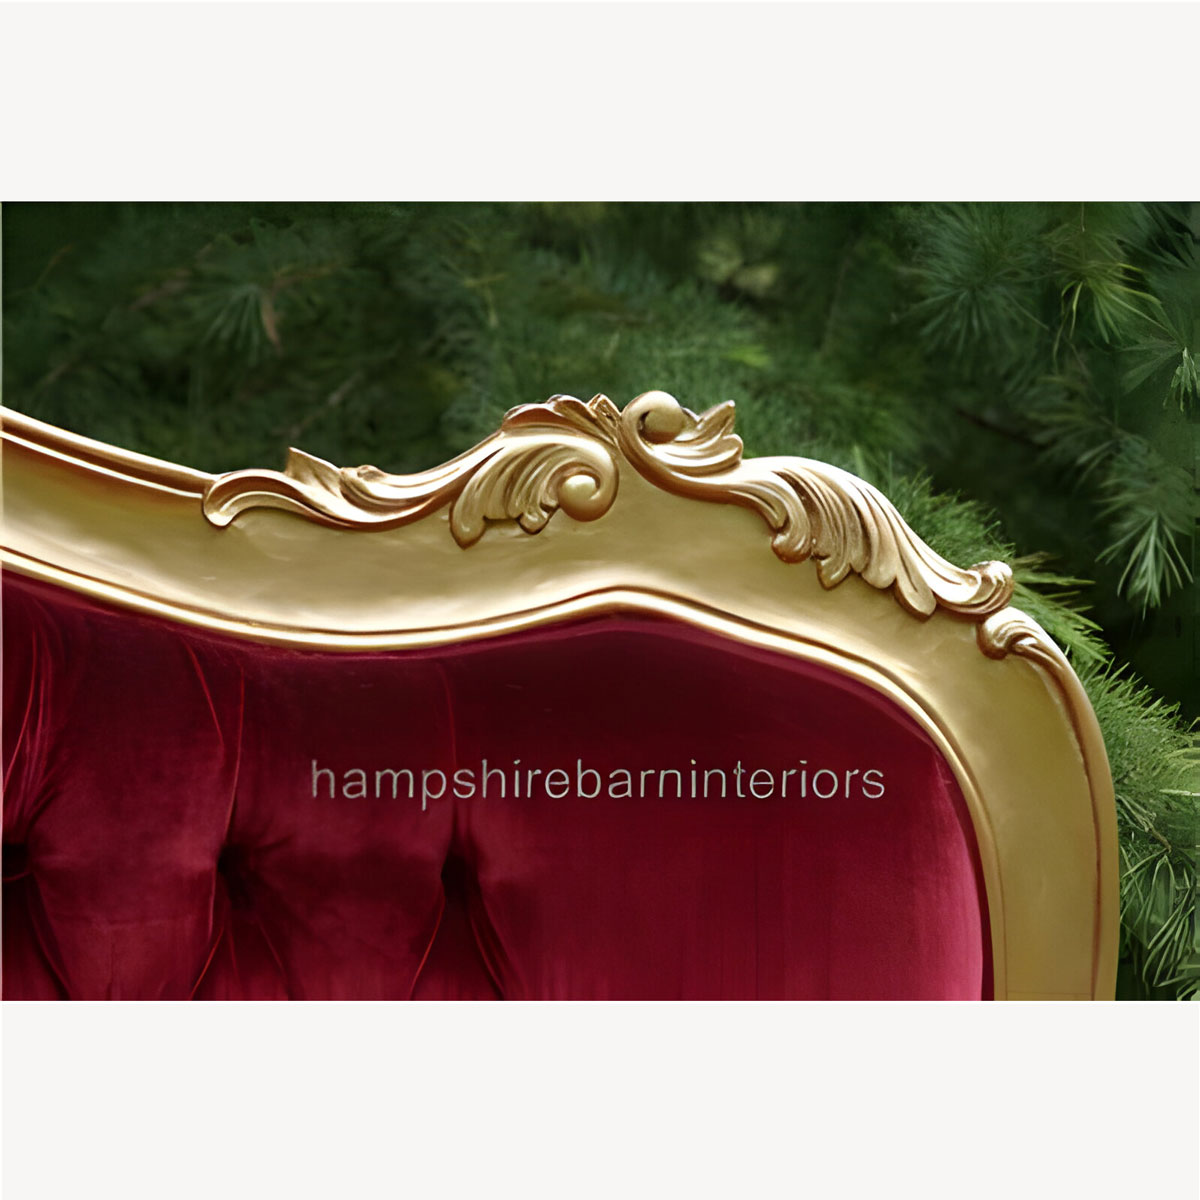 Beautiful Red Velvet And Gold Leaf Hilton Chaise Longue 4 - Hampshire Barn Interiors - Beautiful Red Velvet And Gold Leaf Hilton Chaise Longue -